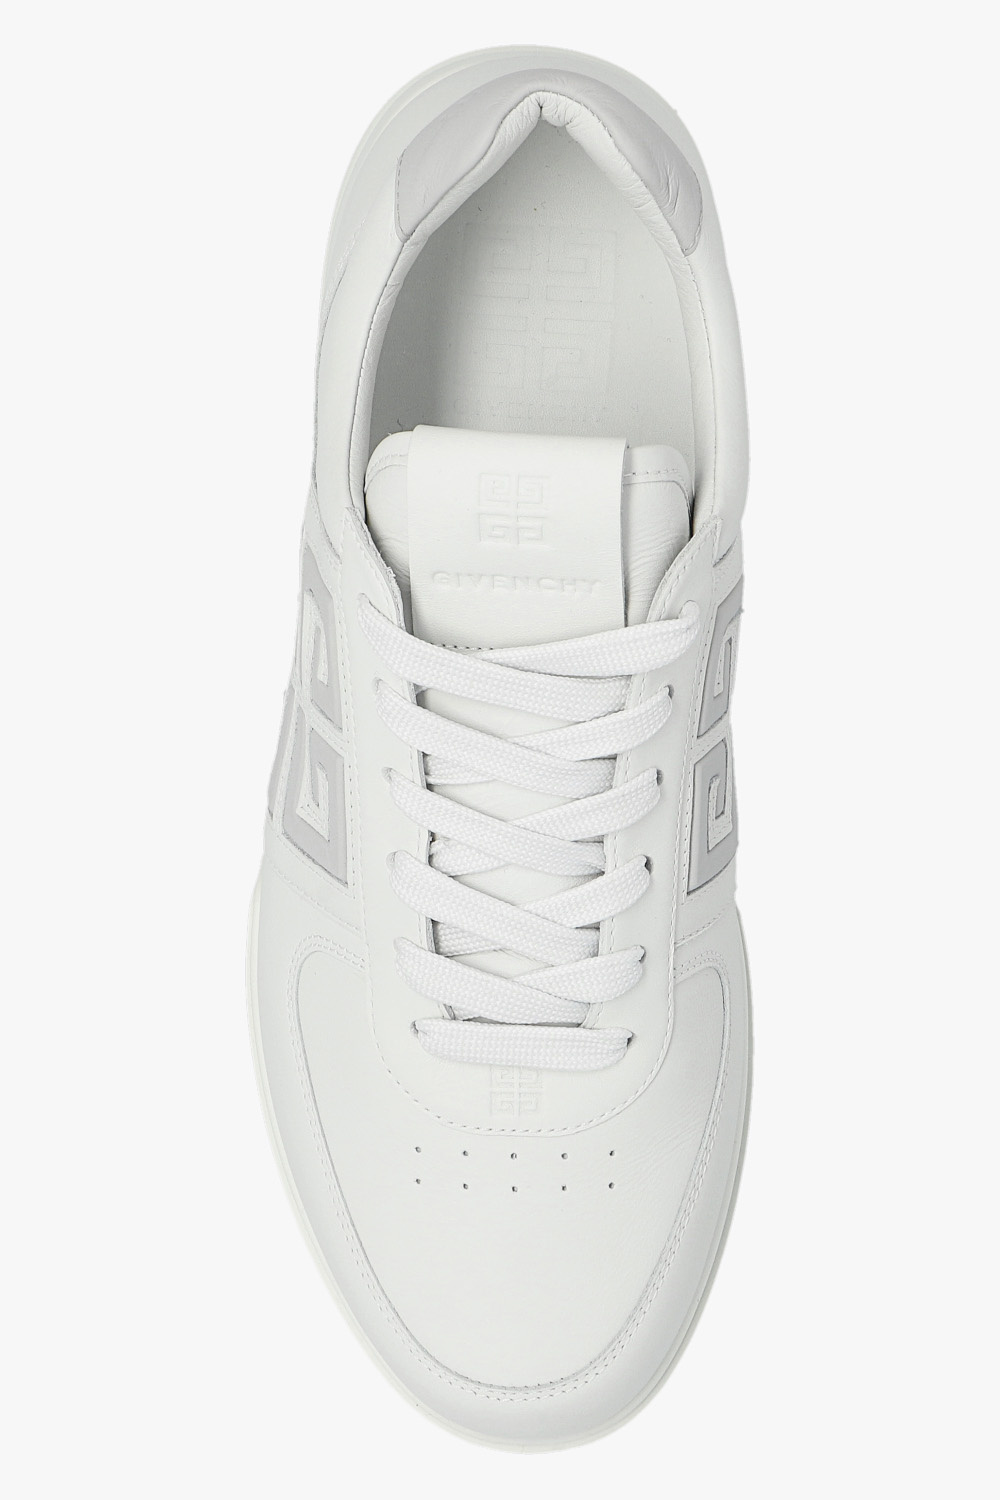 givenchy belt ‘G4’ sneakers